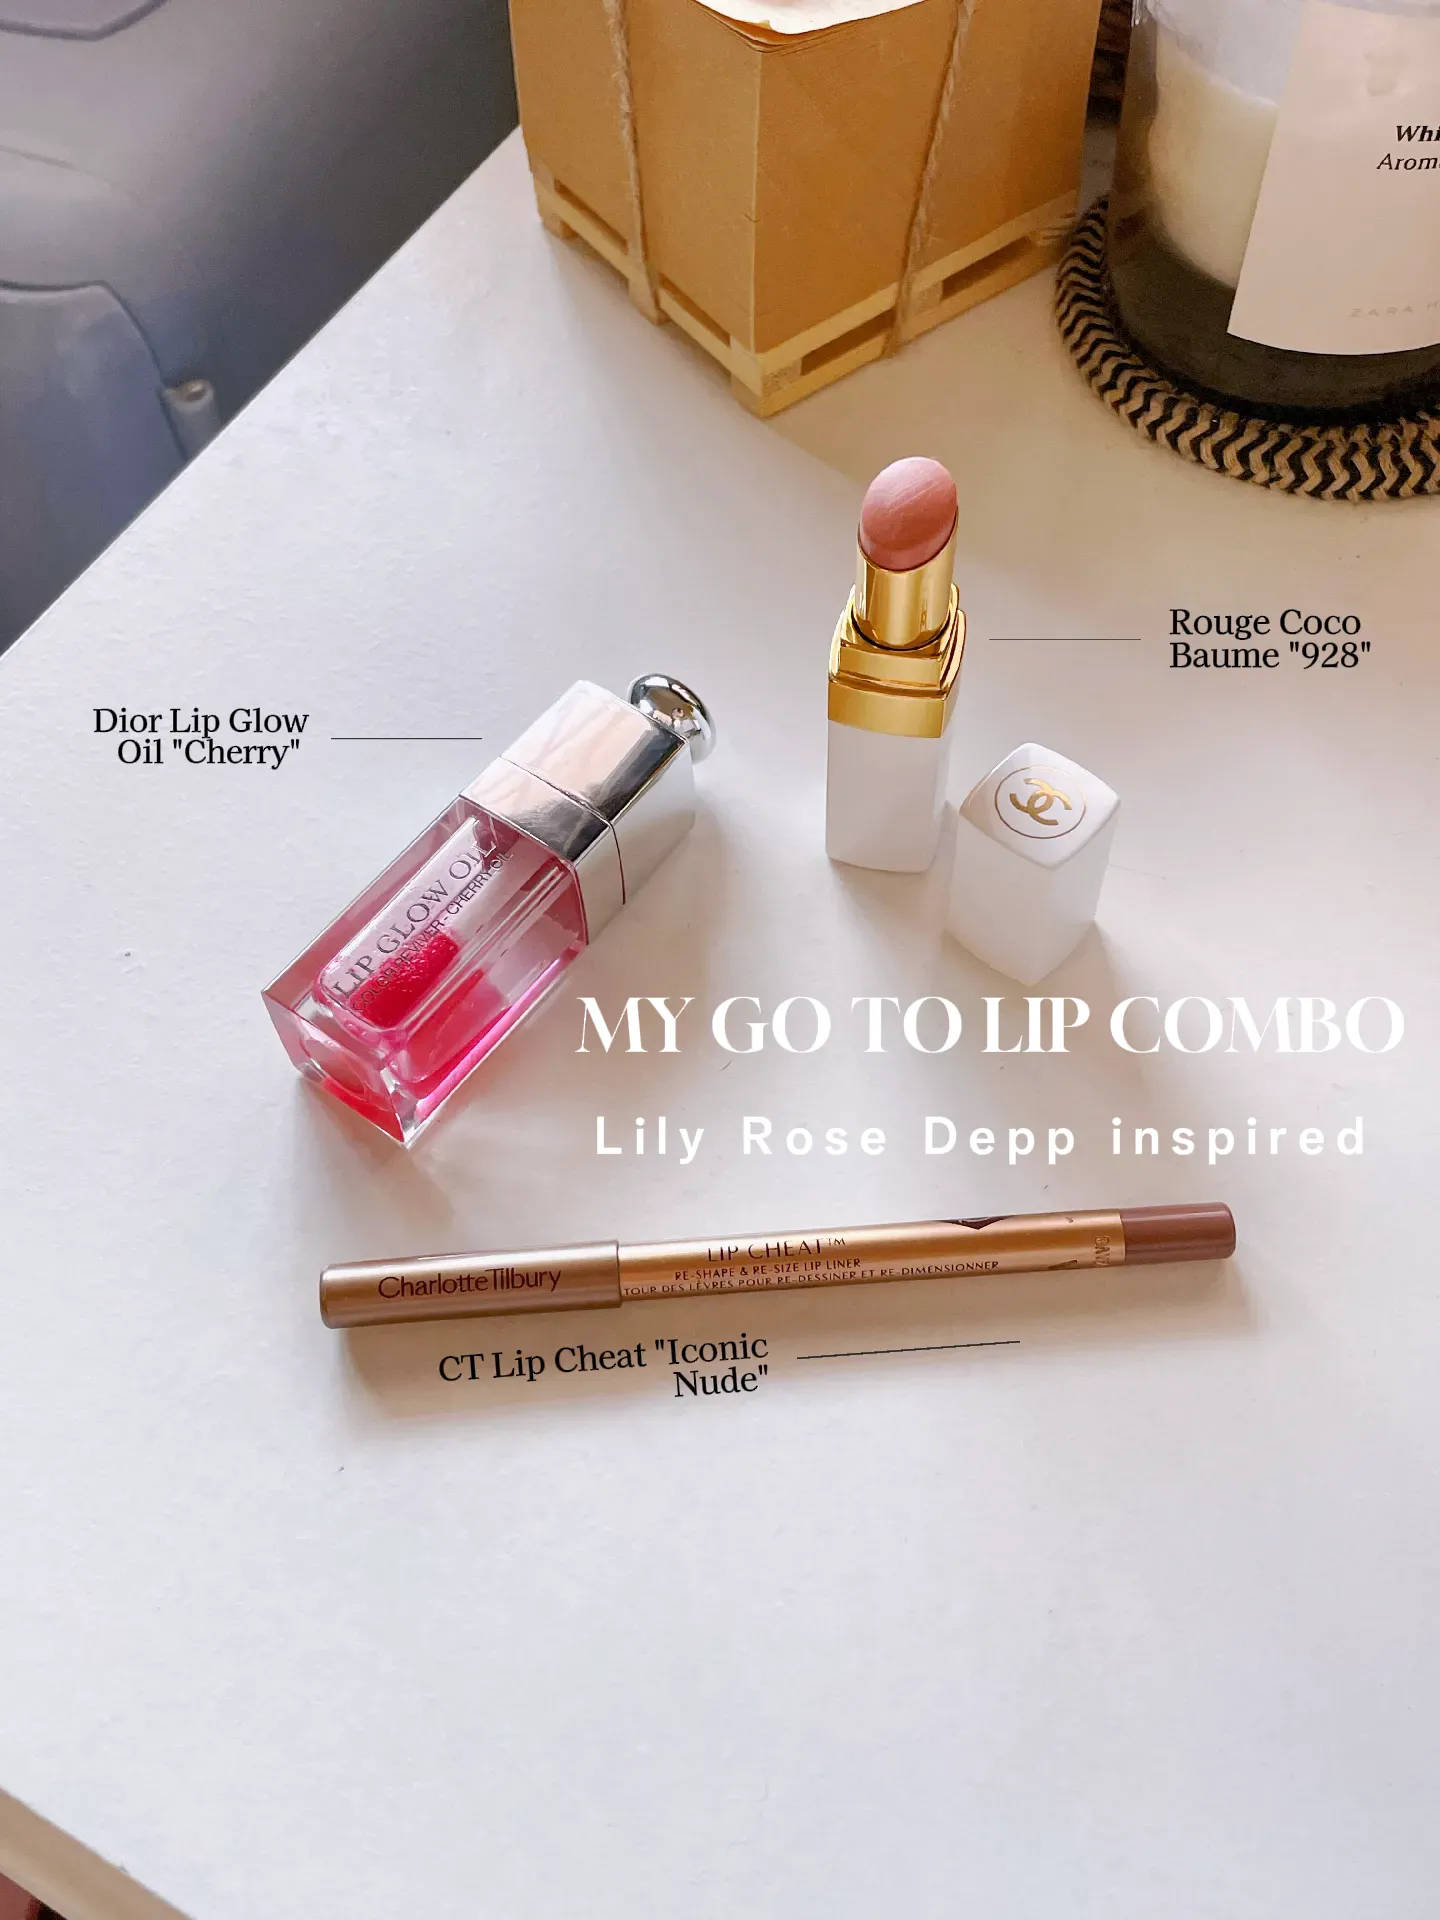 Lily Rose Depp inspired Lip Combo✨, Gallery posted by brigite